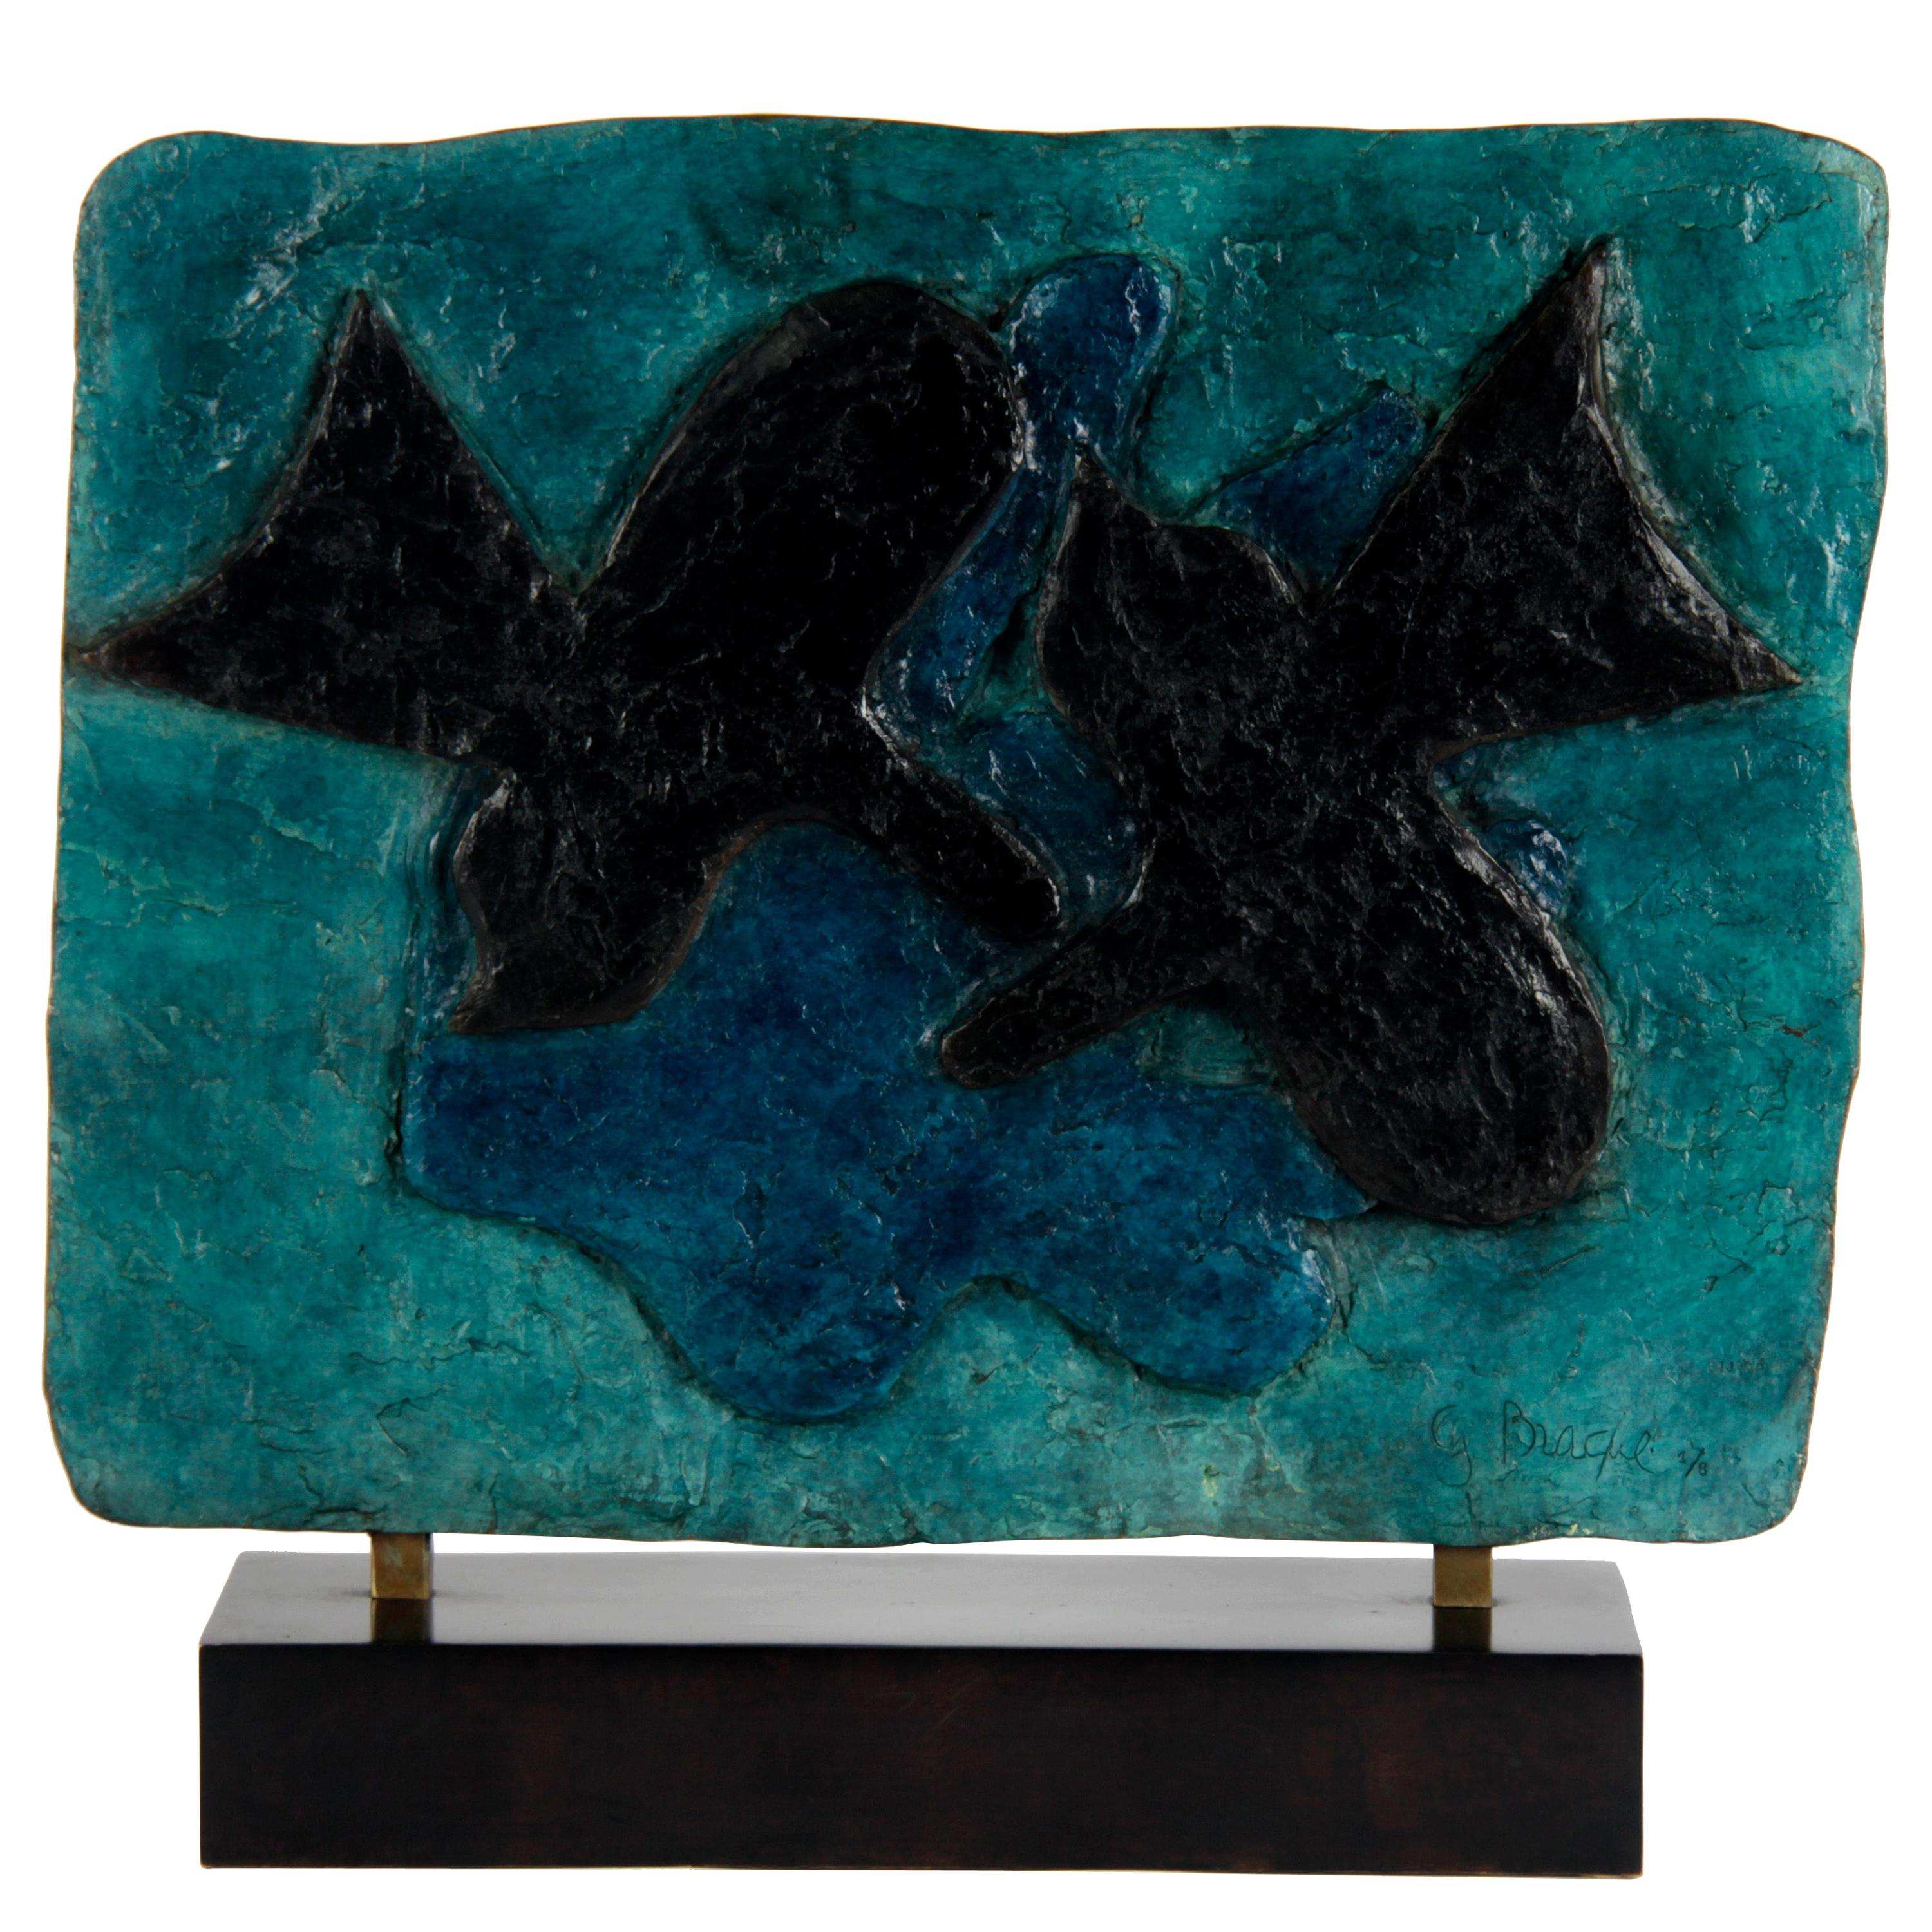 20th Century Bronze Plaquette Signed by Georges Braque